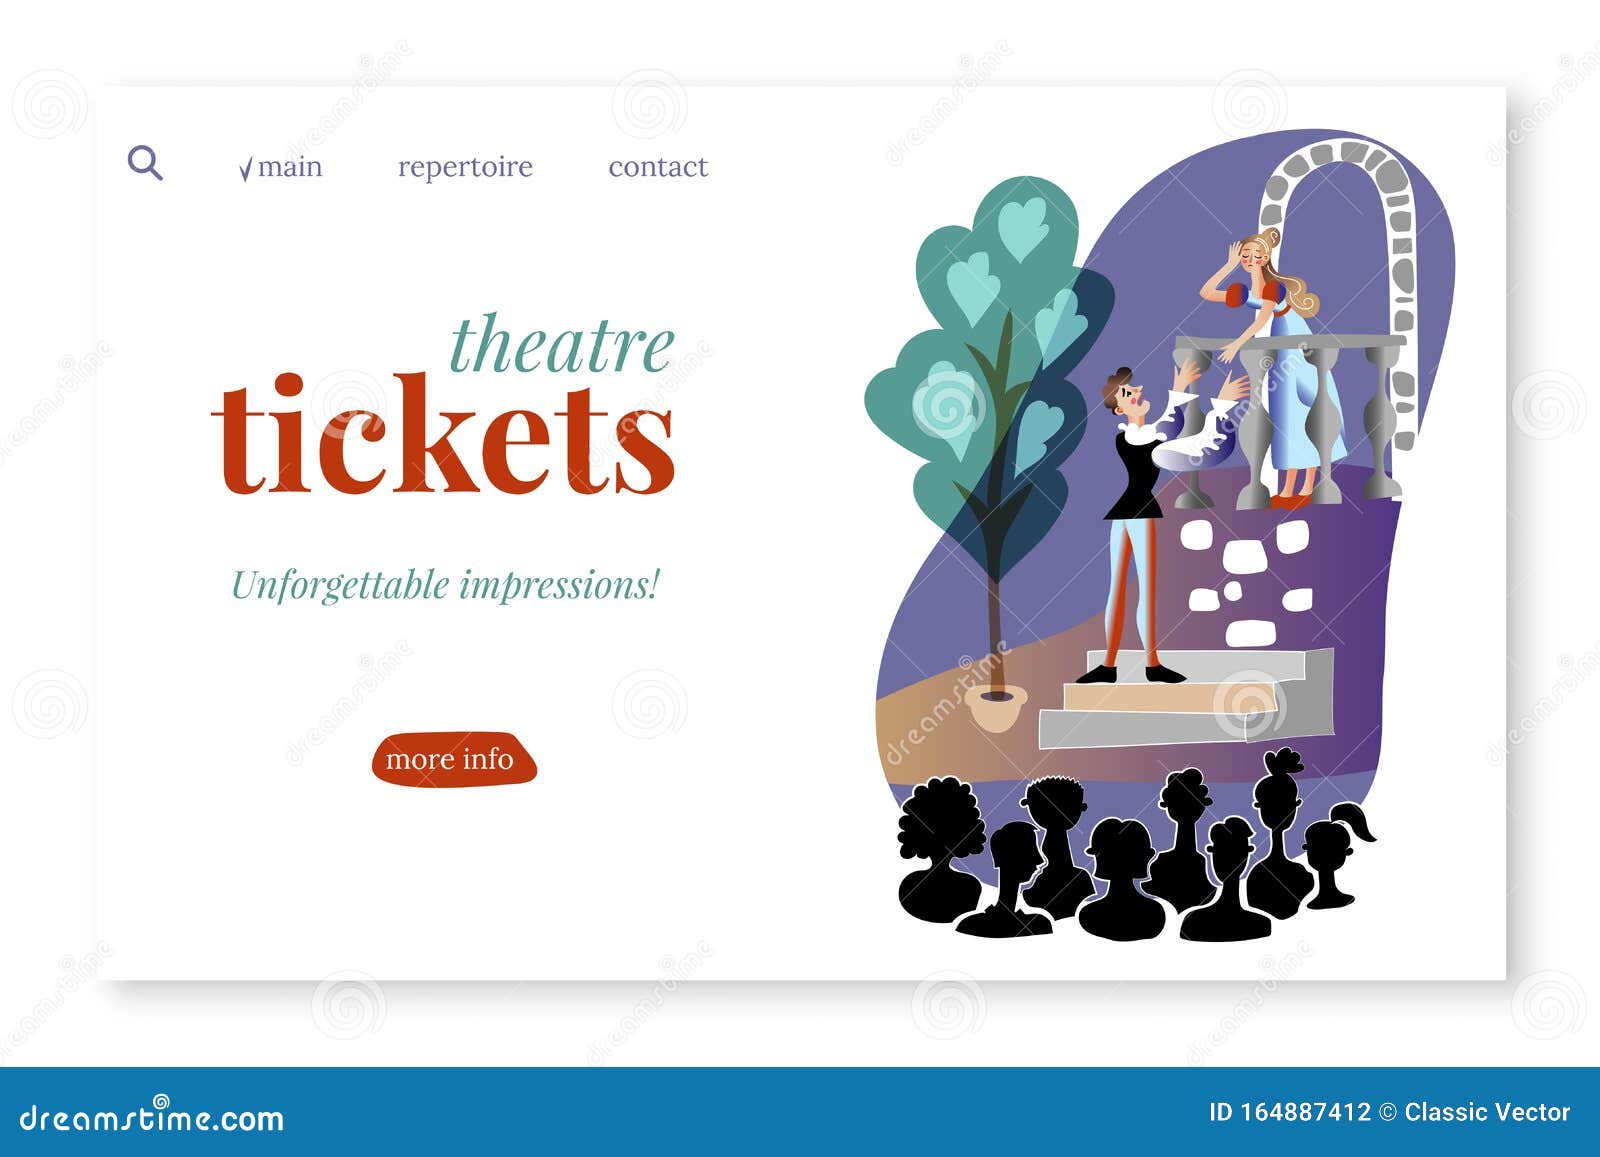 theatre tickets  landing page template